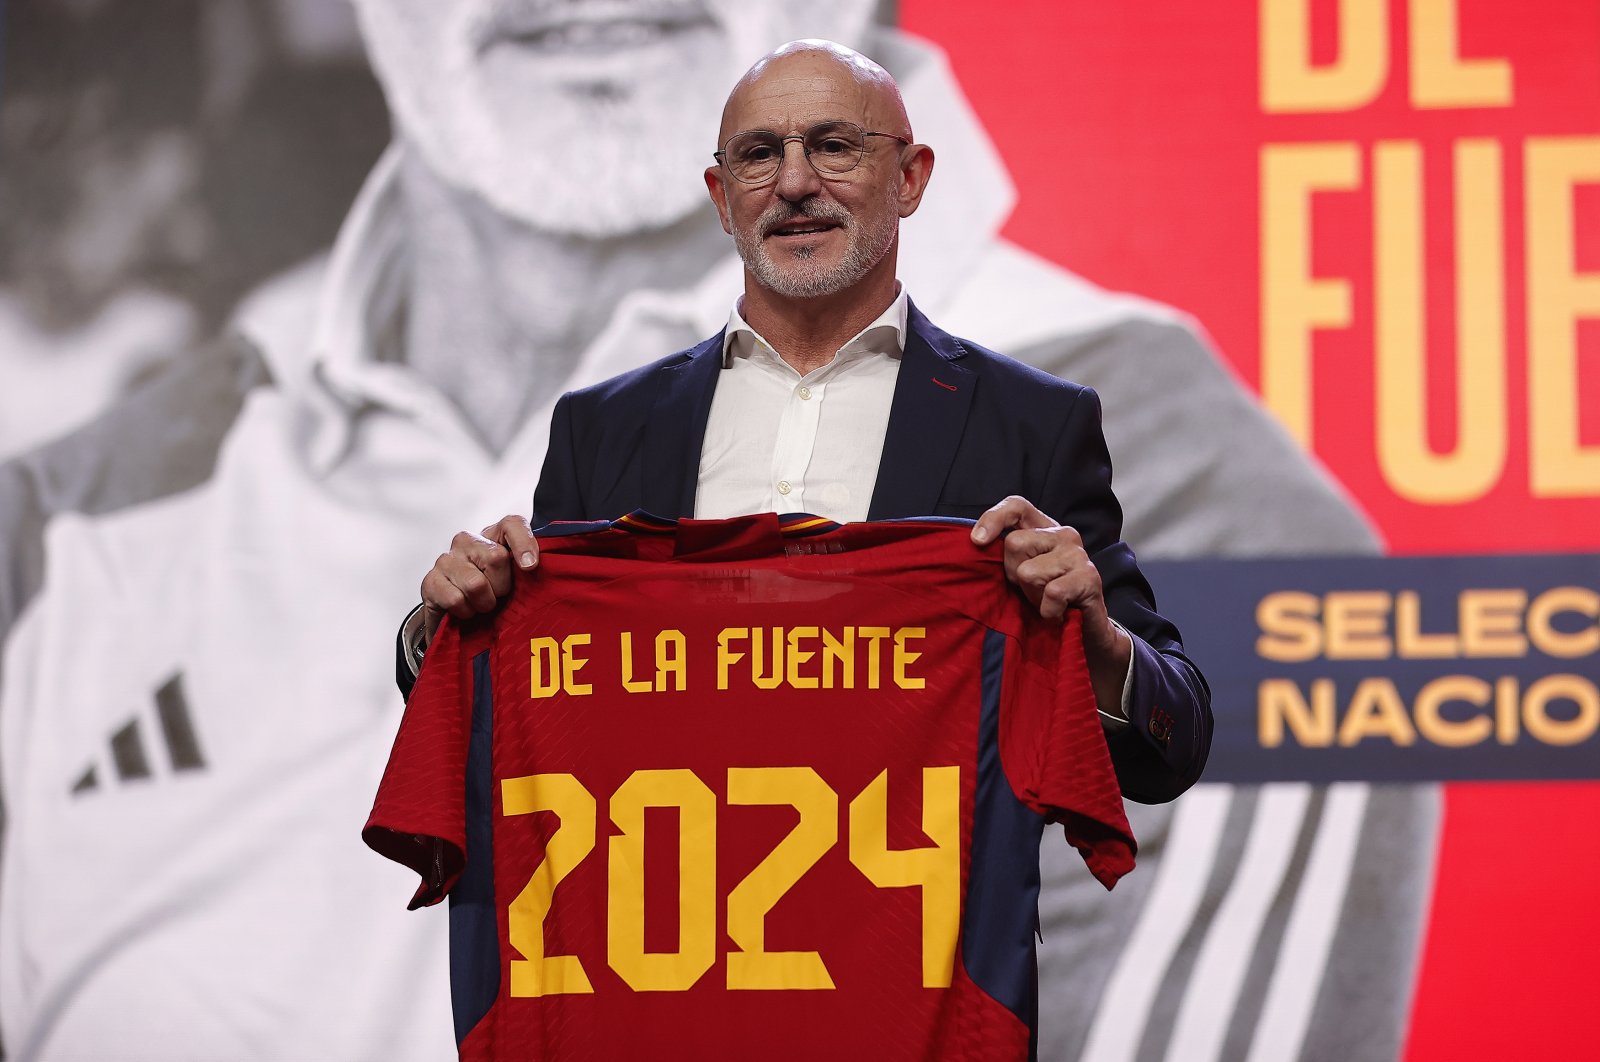 Spanish National Team coach, Luis de la Fuente, posing for a photo after his official appointment ceremony at the Royal Spanish Football Federation facilities, Madrid, Spain, Dec. 12, 2022. (AA Photo)